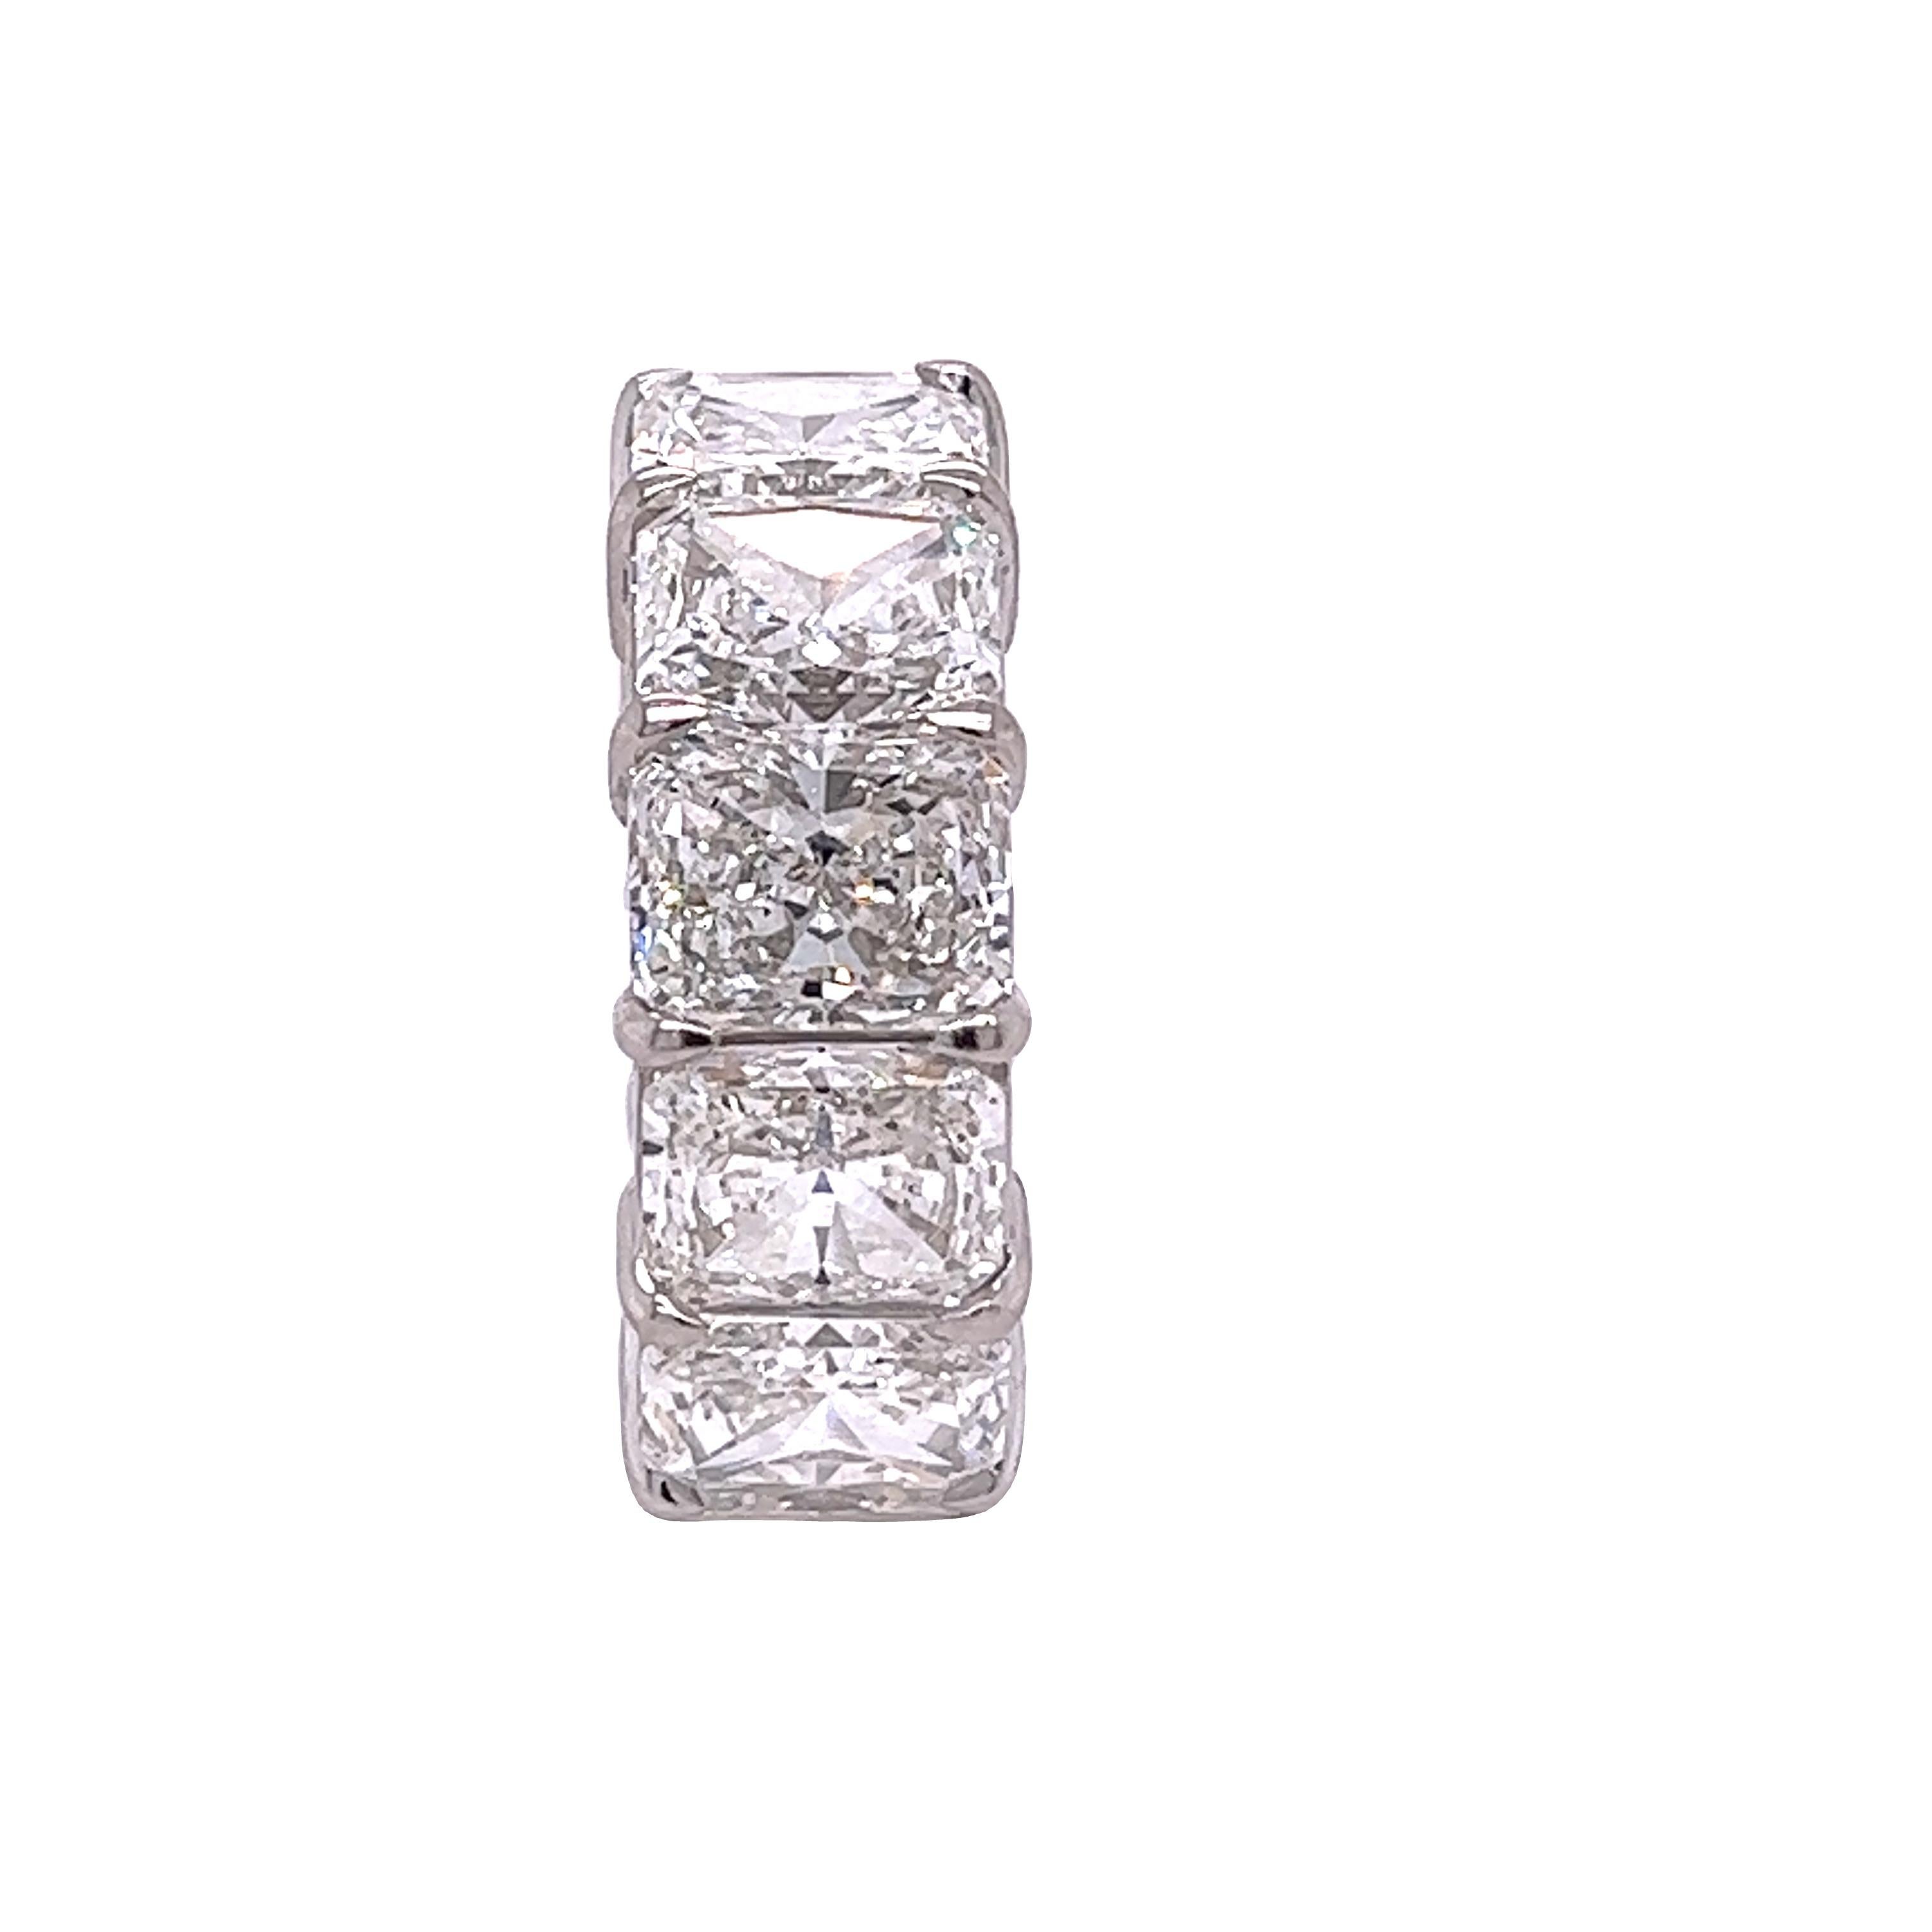 Rosenberg Diamonds & Co. 18.24 total carat weight Radiant cut diamond eternity band. This beautiful platinum eternity band has twelve elongated radiant cut diamonds ranging from G-H in color VVS1-VS2 in clarity with an average of just over one and a